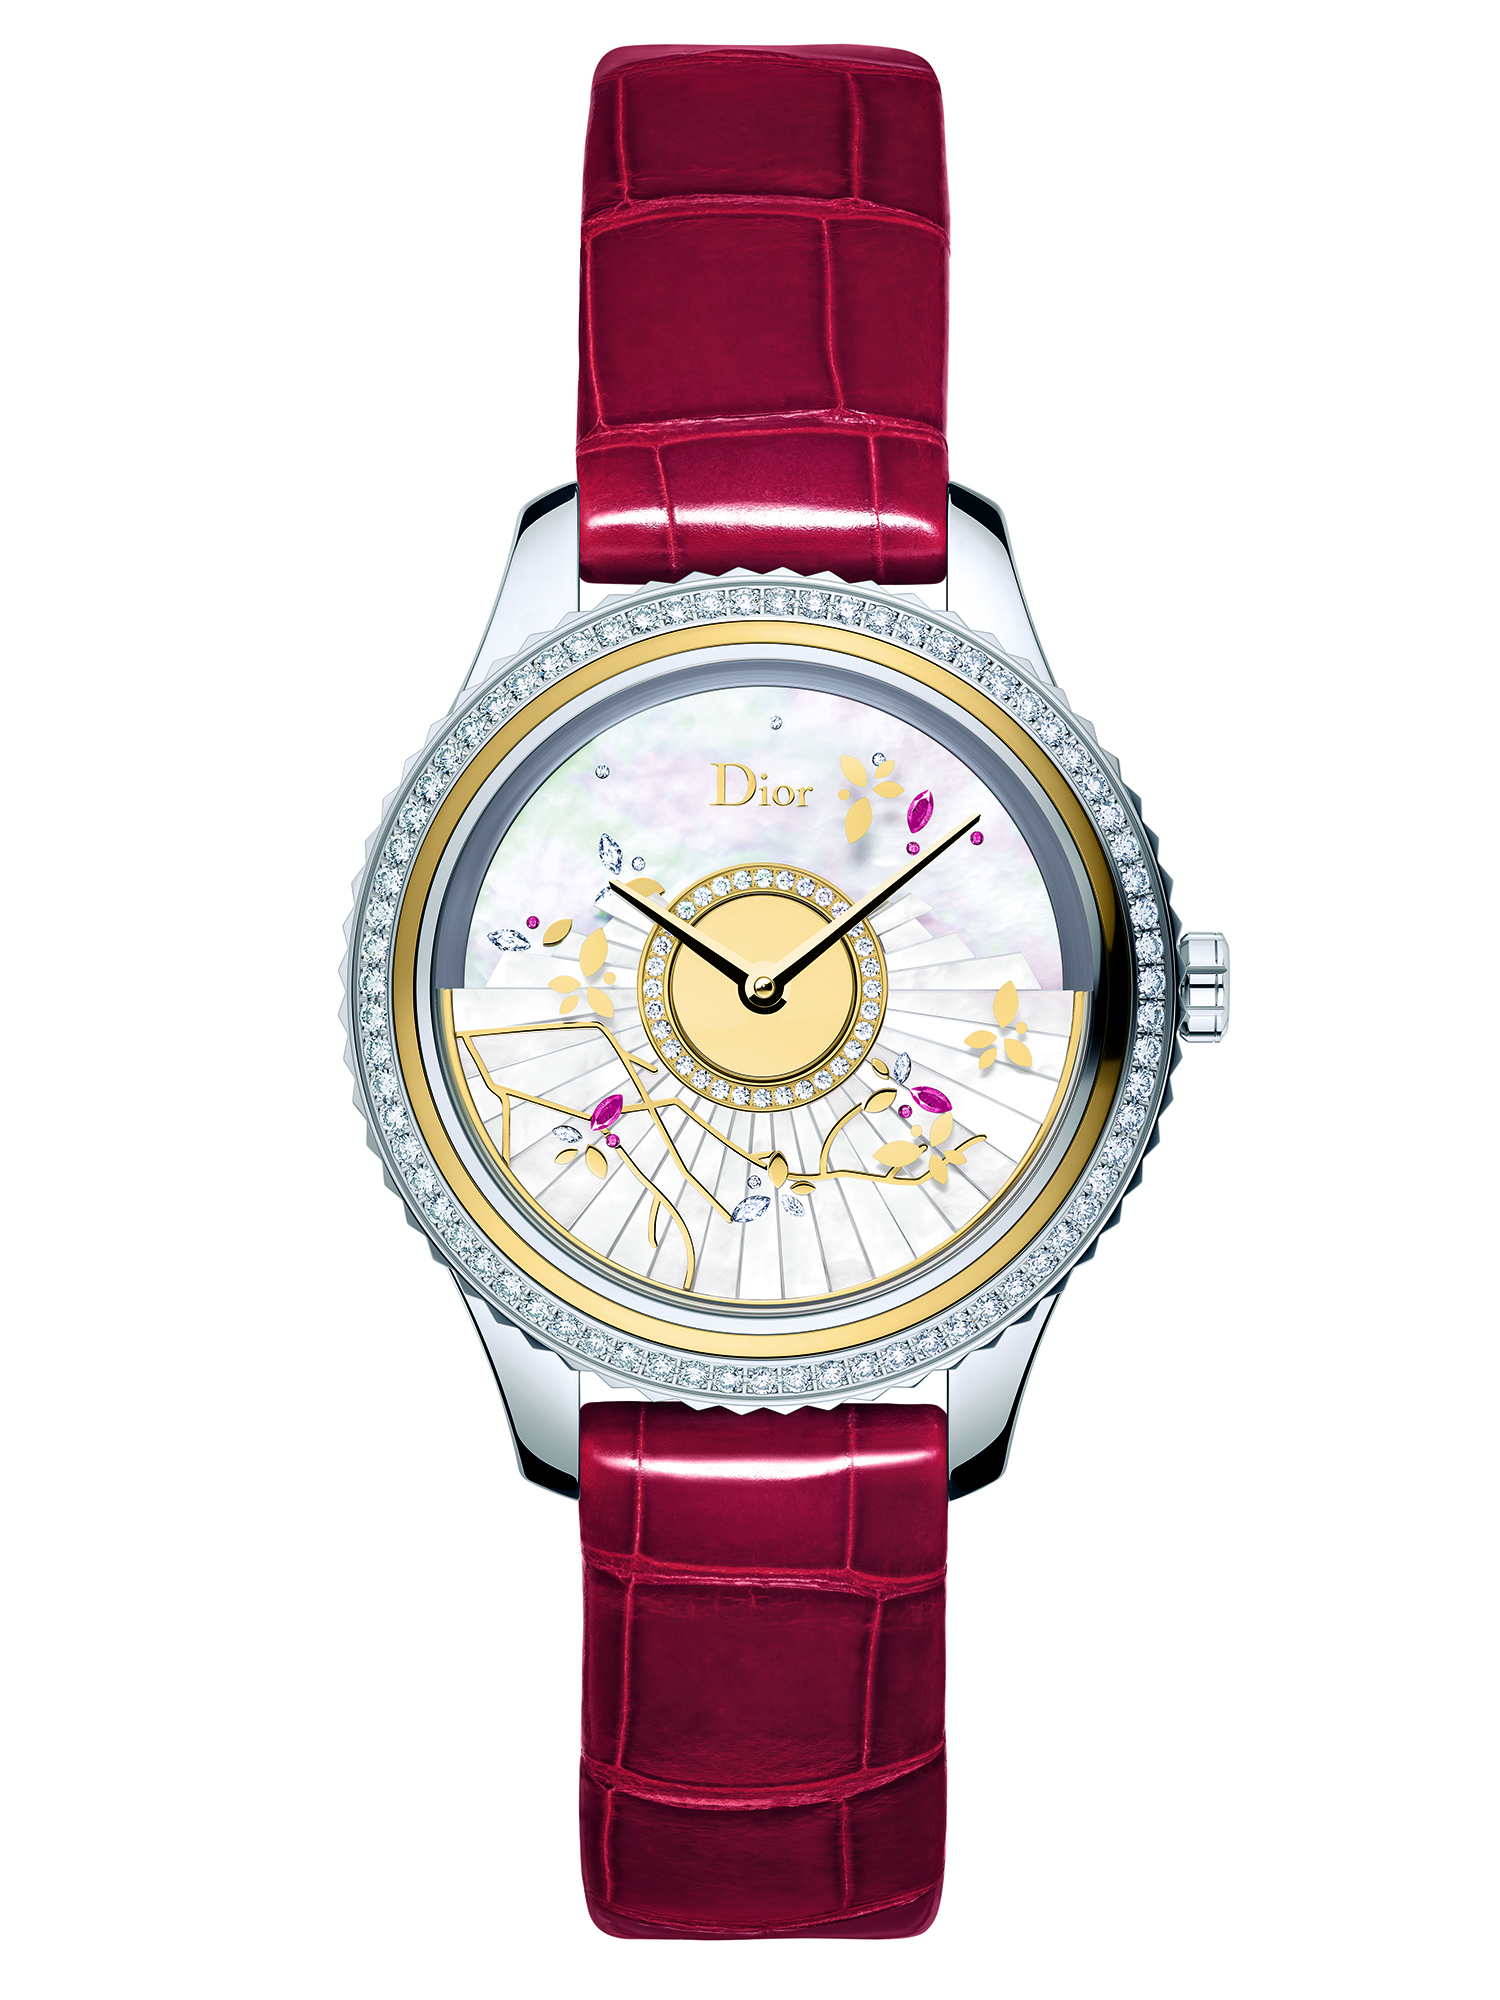 Dior grand bal fête du printemps watch in steel, yellow gold, diamonds, rubies and mother-of-pearl with a shiny red alligator strap, £23,600, by dior watches.